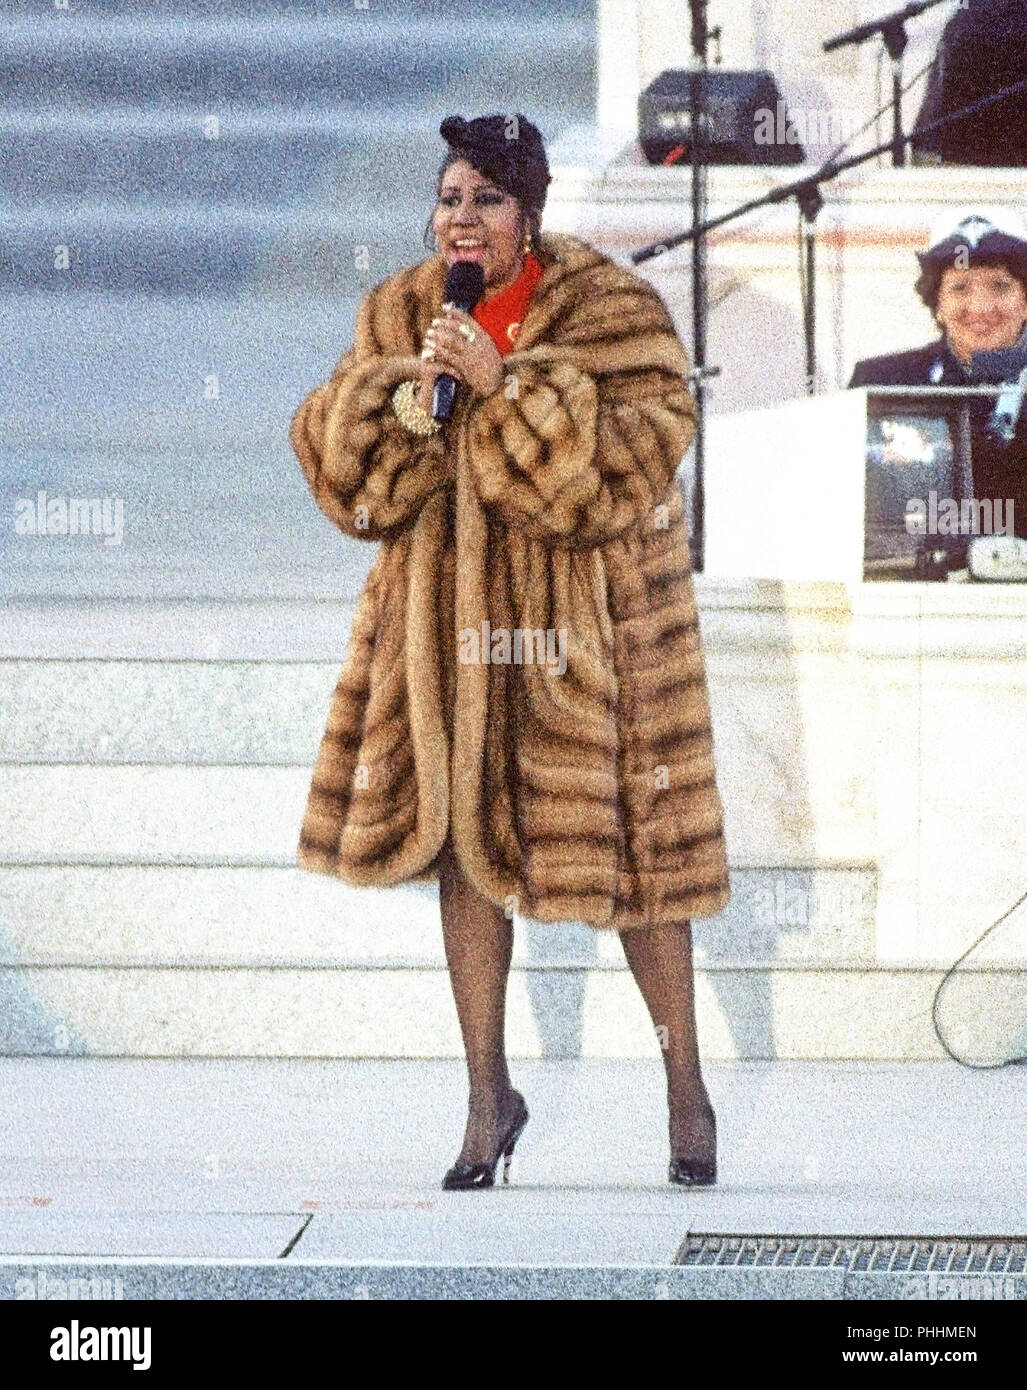 Entertainer Aretha Franklin performs at the concert at the Lincoln Memorial that was part of the 'American Reunion' celebration leading up to the swearing-in ceremony for Bill Clinton as the 42nd President of the United States in Washington, DC on January 17, 1993. Credit: Howard L. Sachs/CNP | usage worldwide Stock Photo